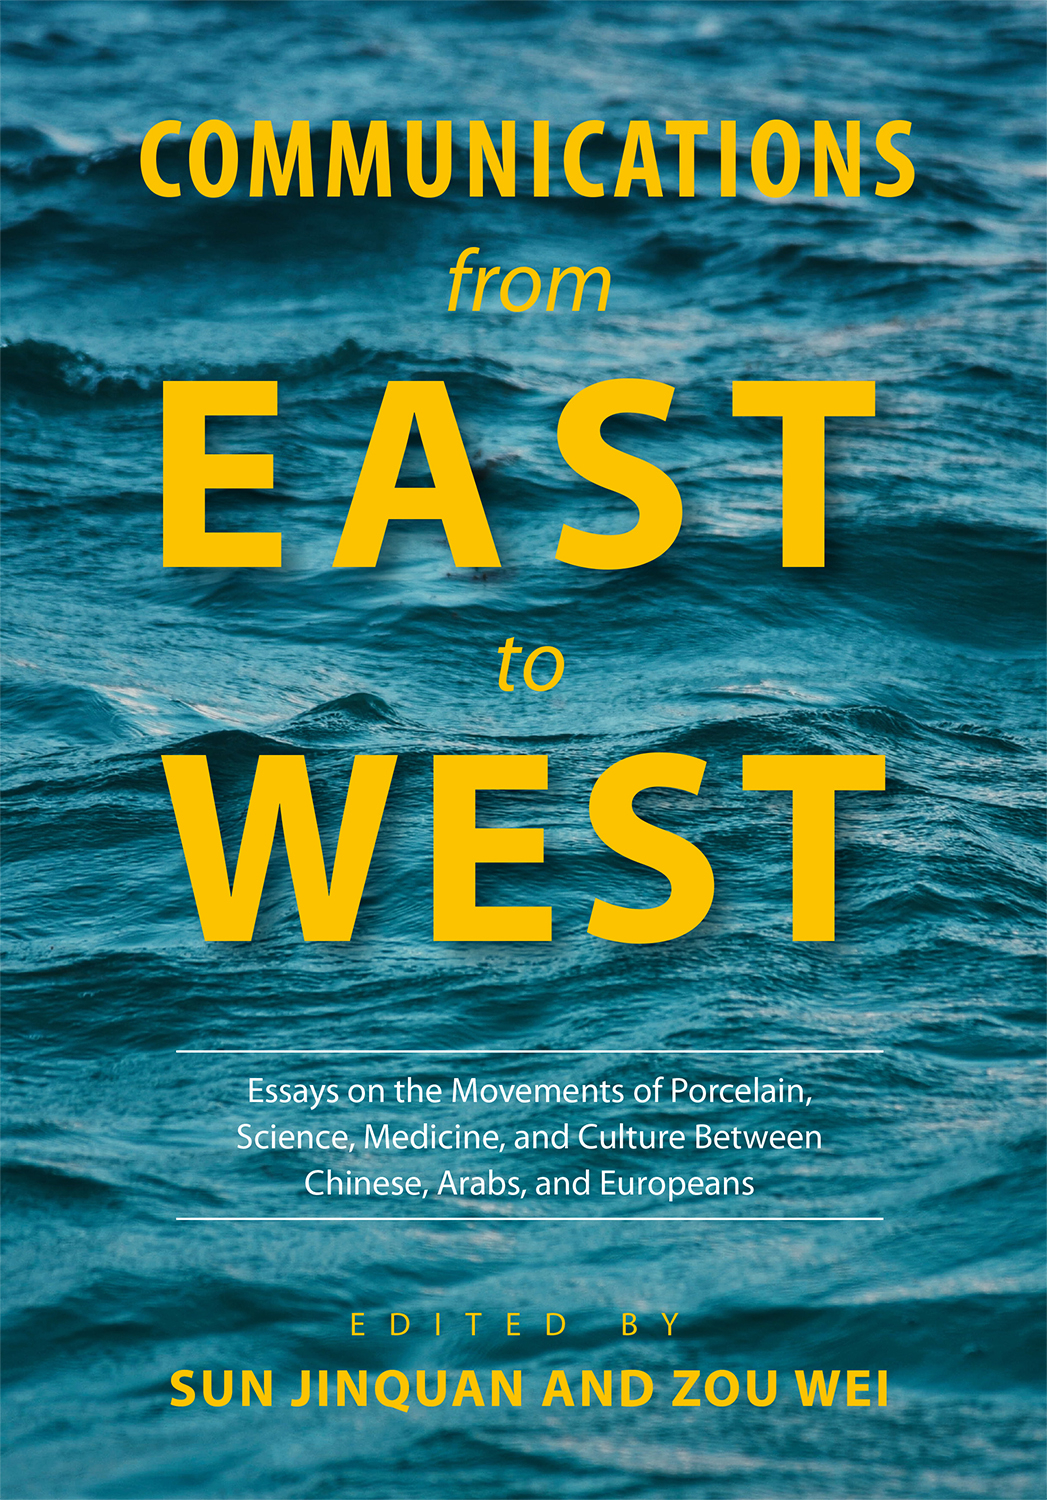 Communications from East to West